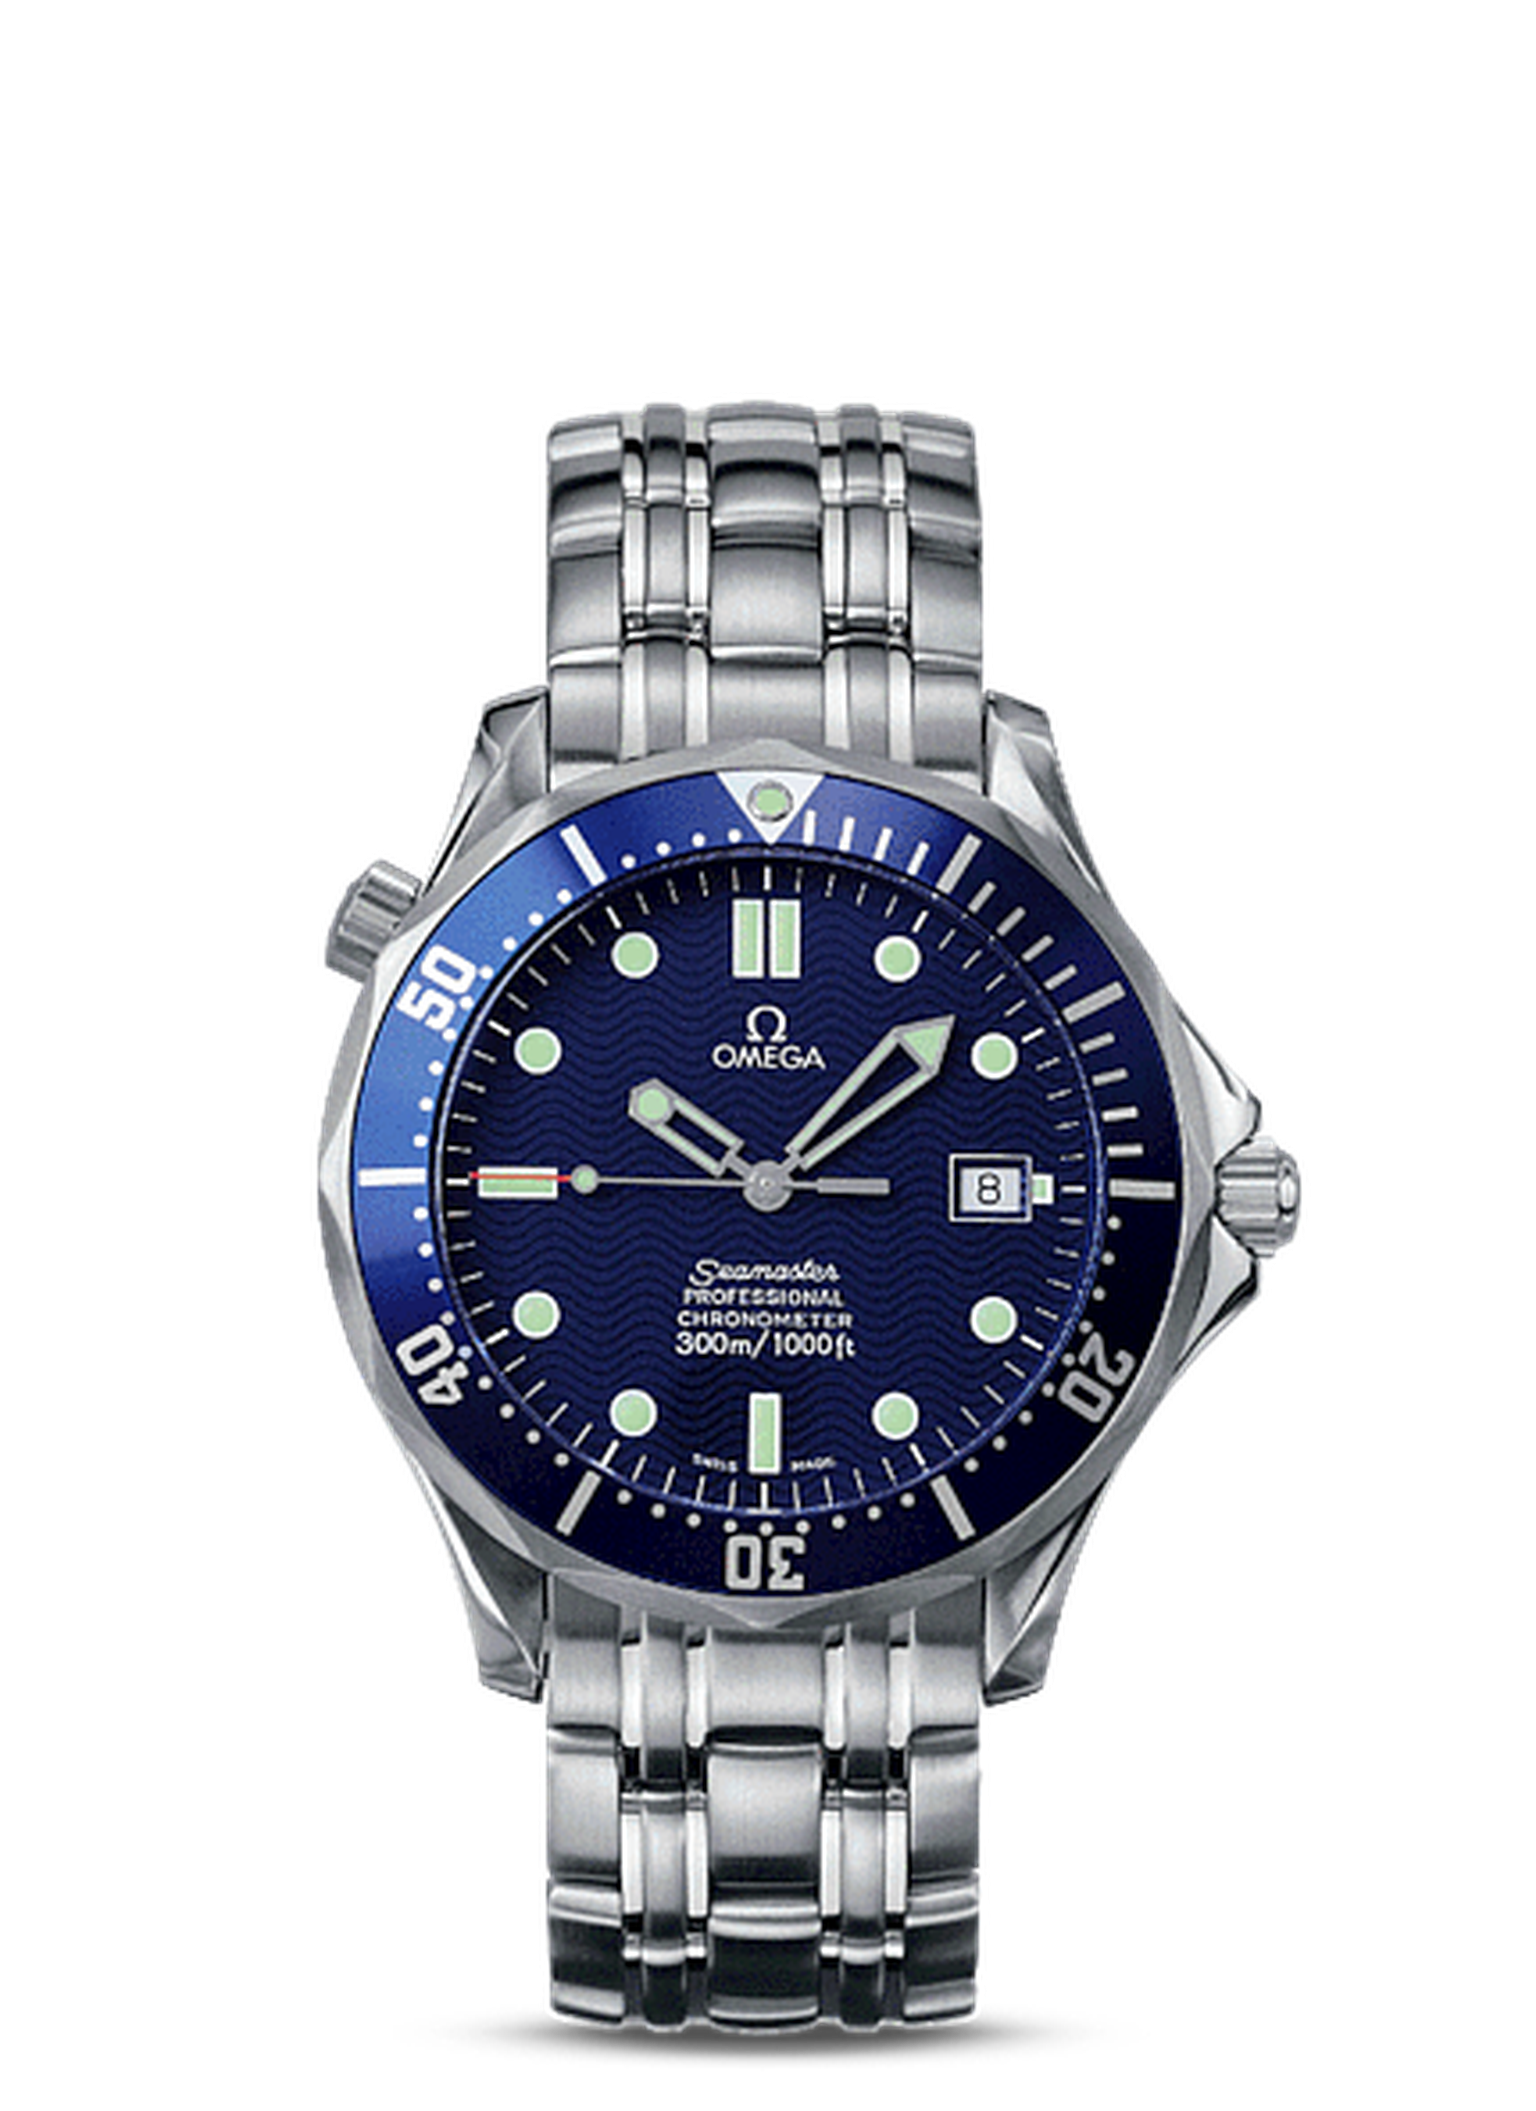 The Omega Seamaster 300m chronometer watch as seen on 007 in Tomorrow Never Dies.